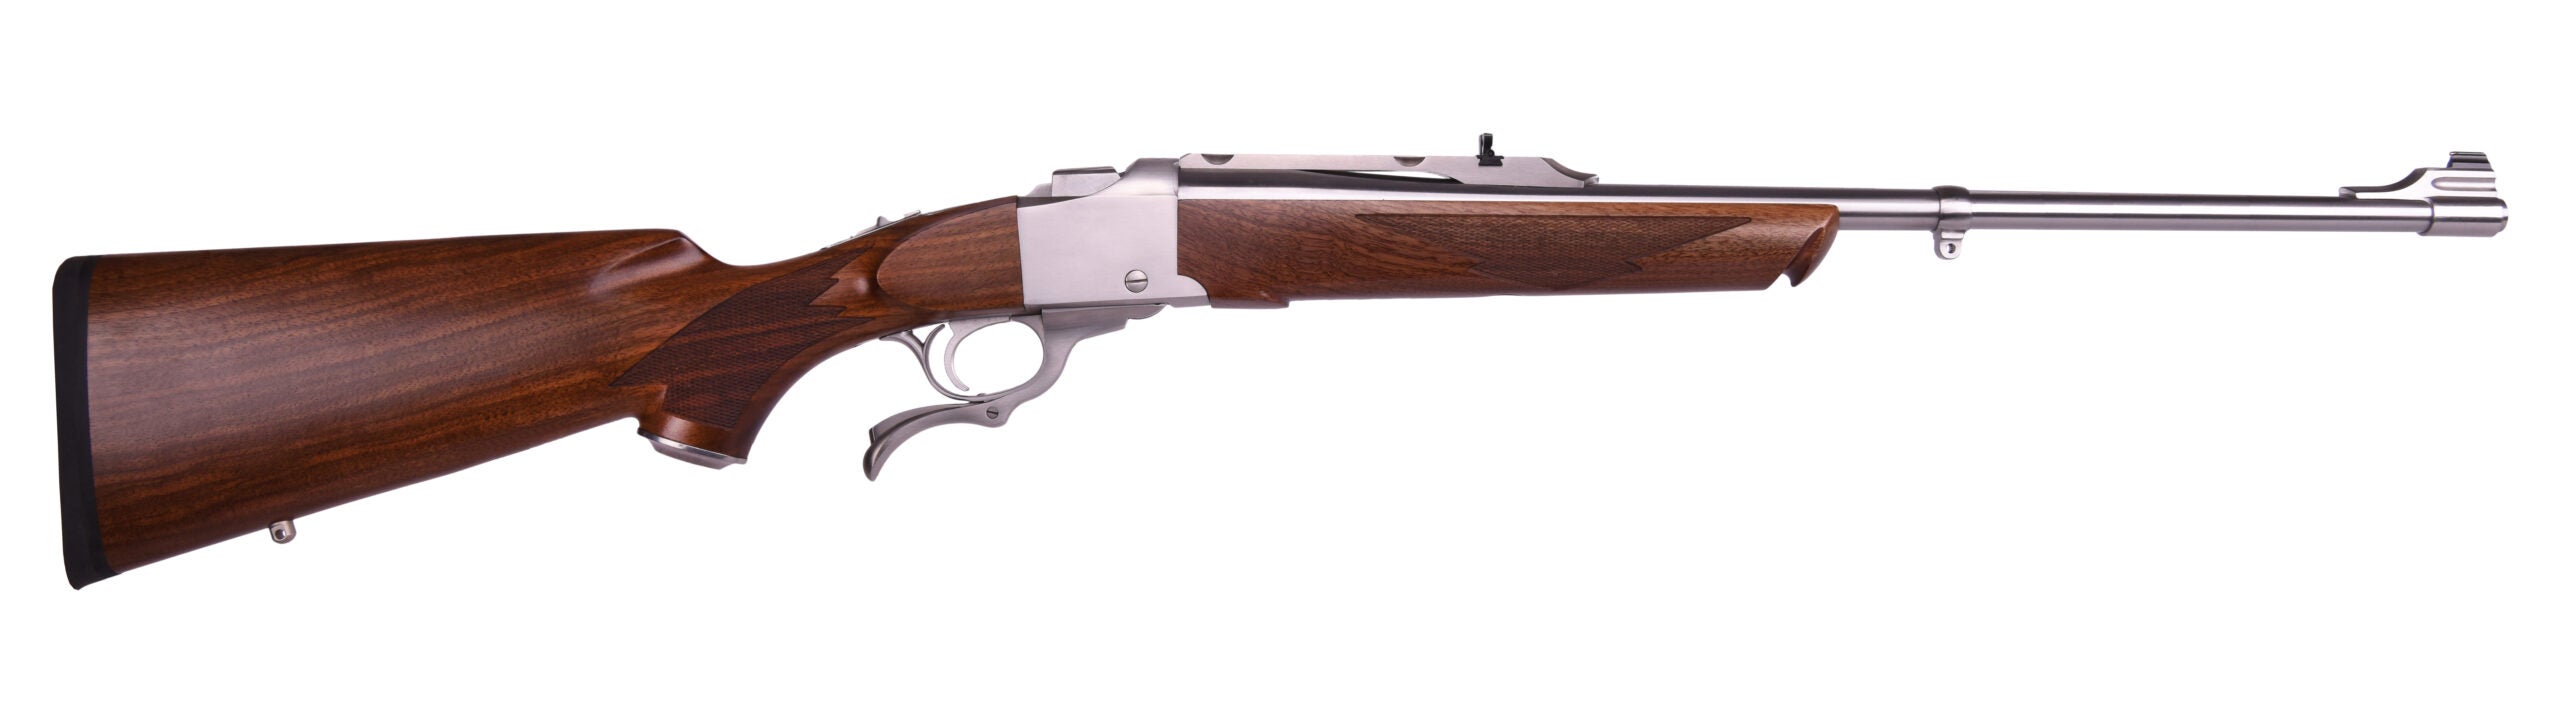 photo of Ruger rifle no.1